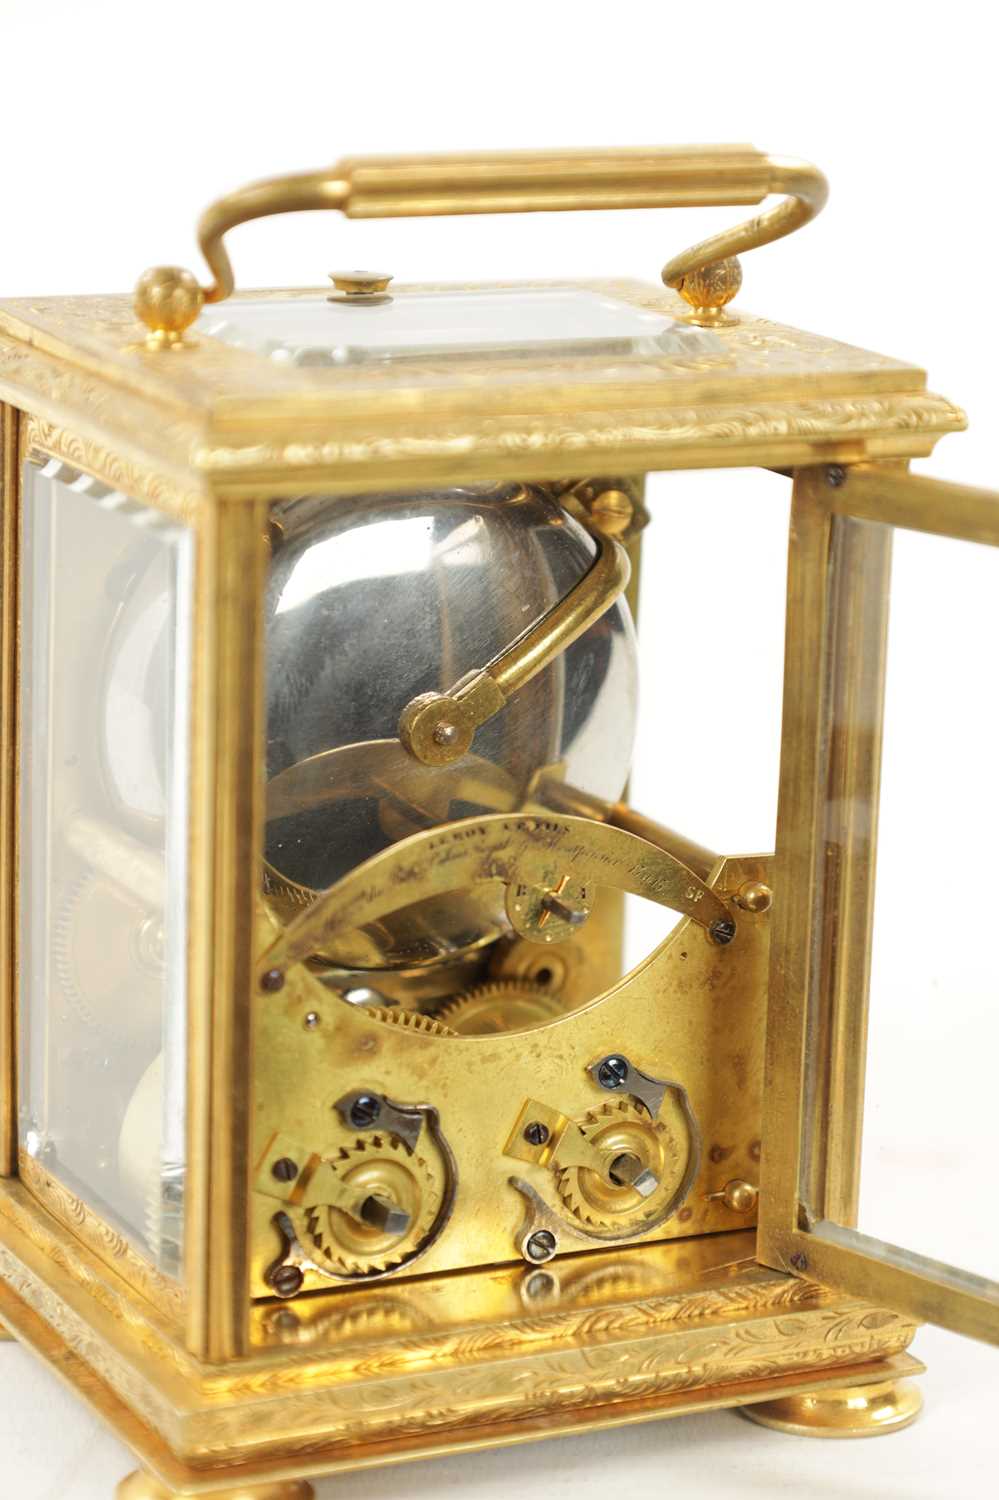 LE ROY ET FILS, PALAIS ROYAL. AN UNUSUAL LATE 19TH CENTURY FRENCH CARRIAGE CLOCK - Image 5 of 7